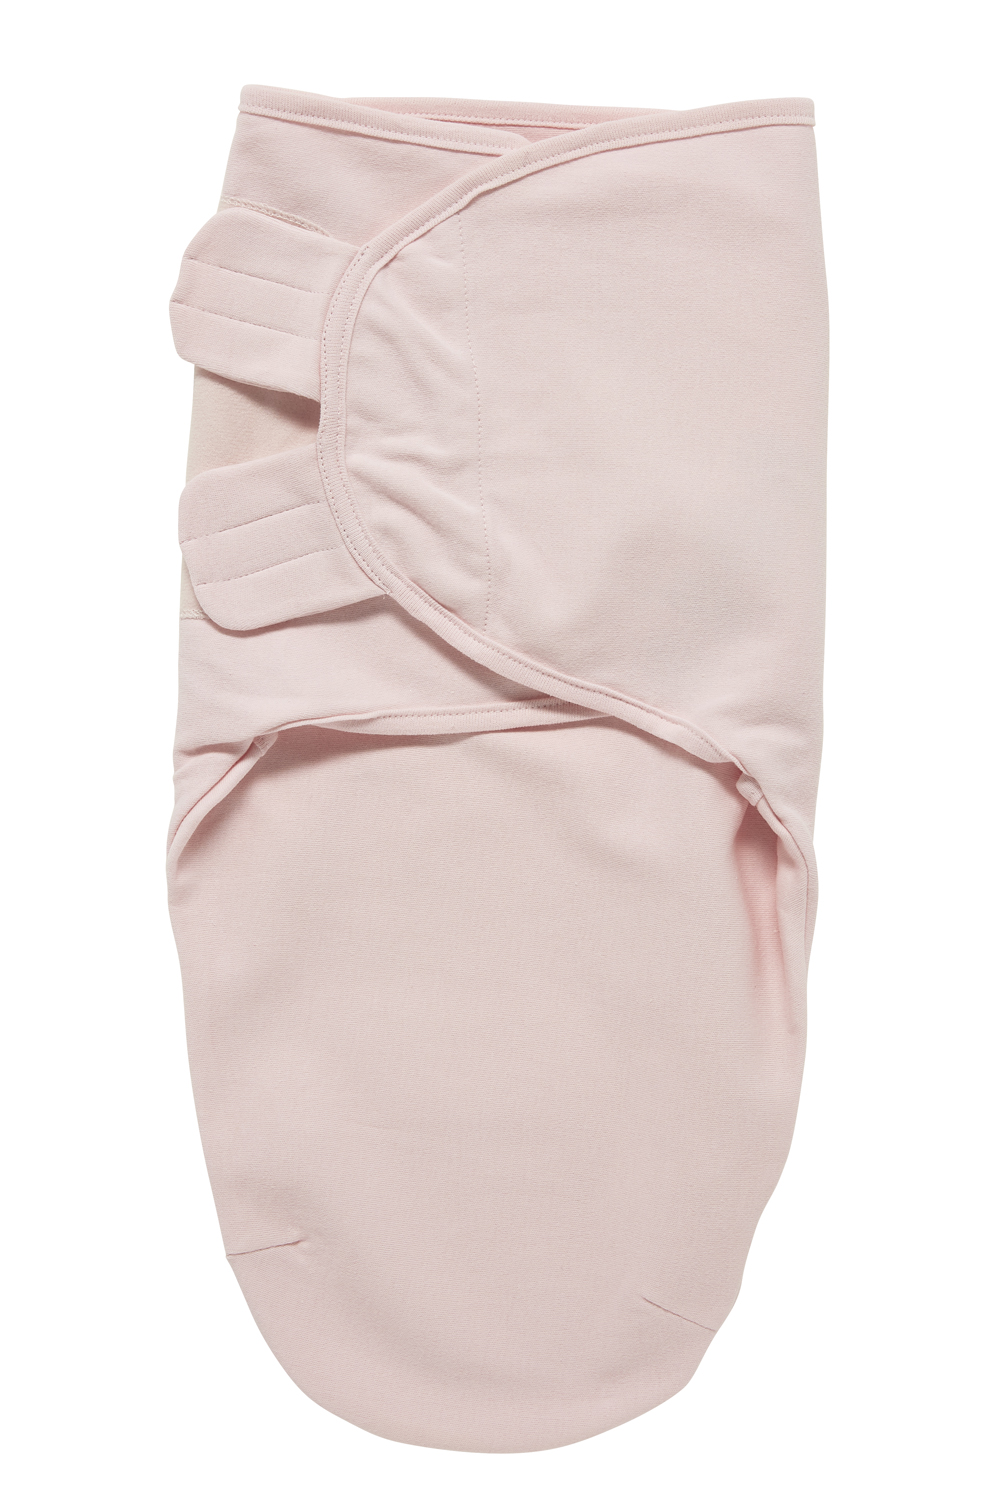 Swaddlemeyco - Light Pink - 4-6 Months